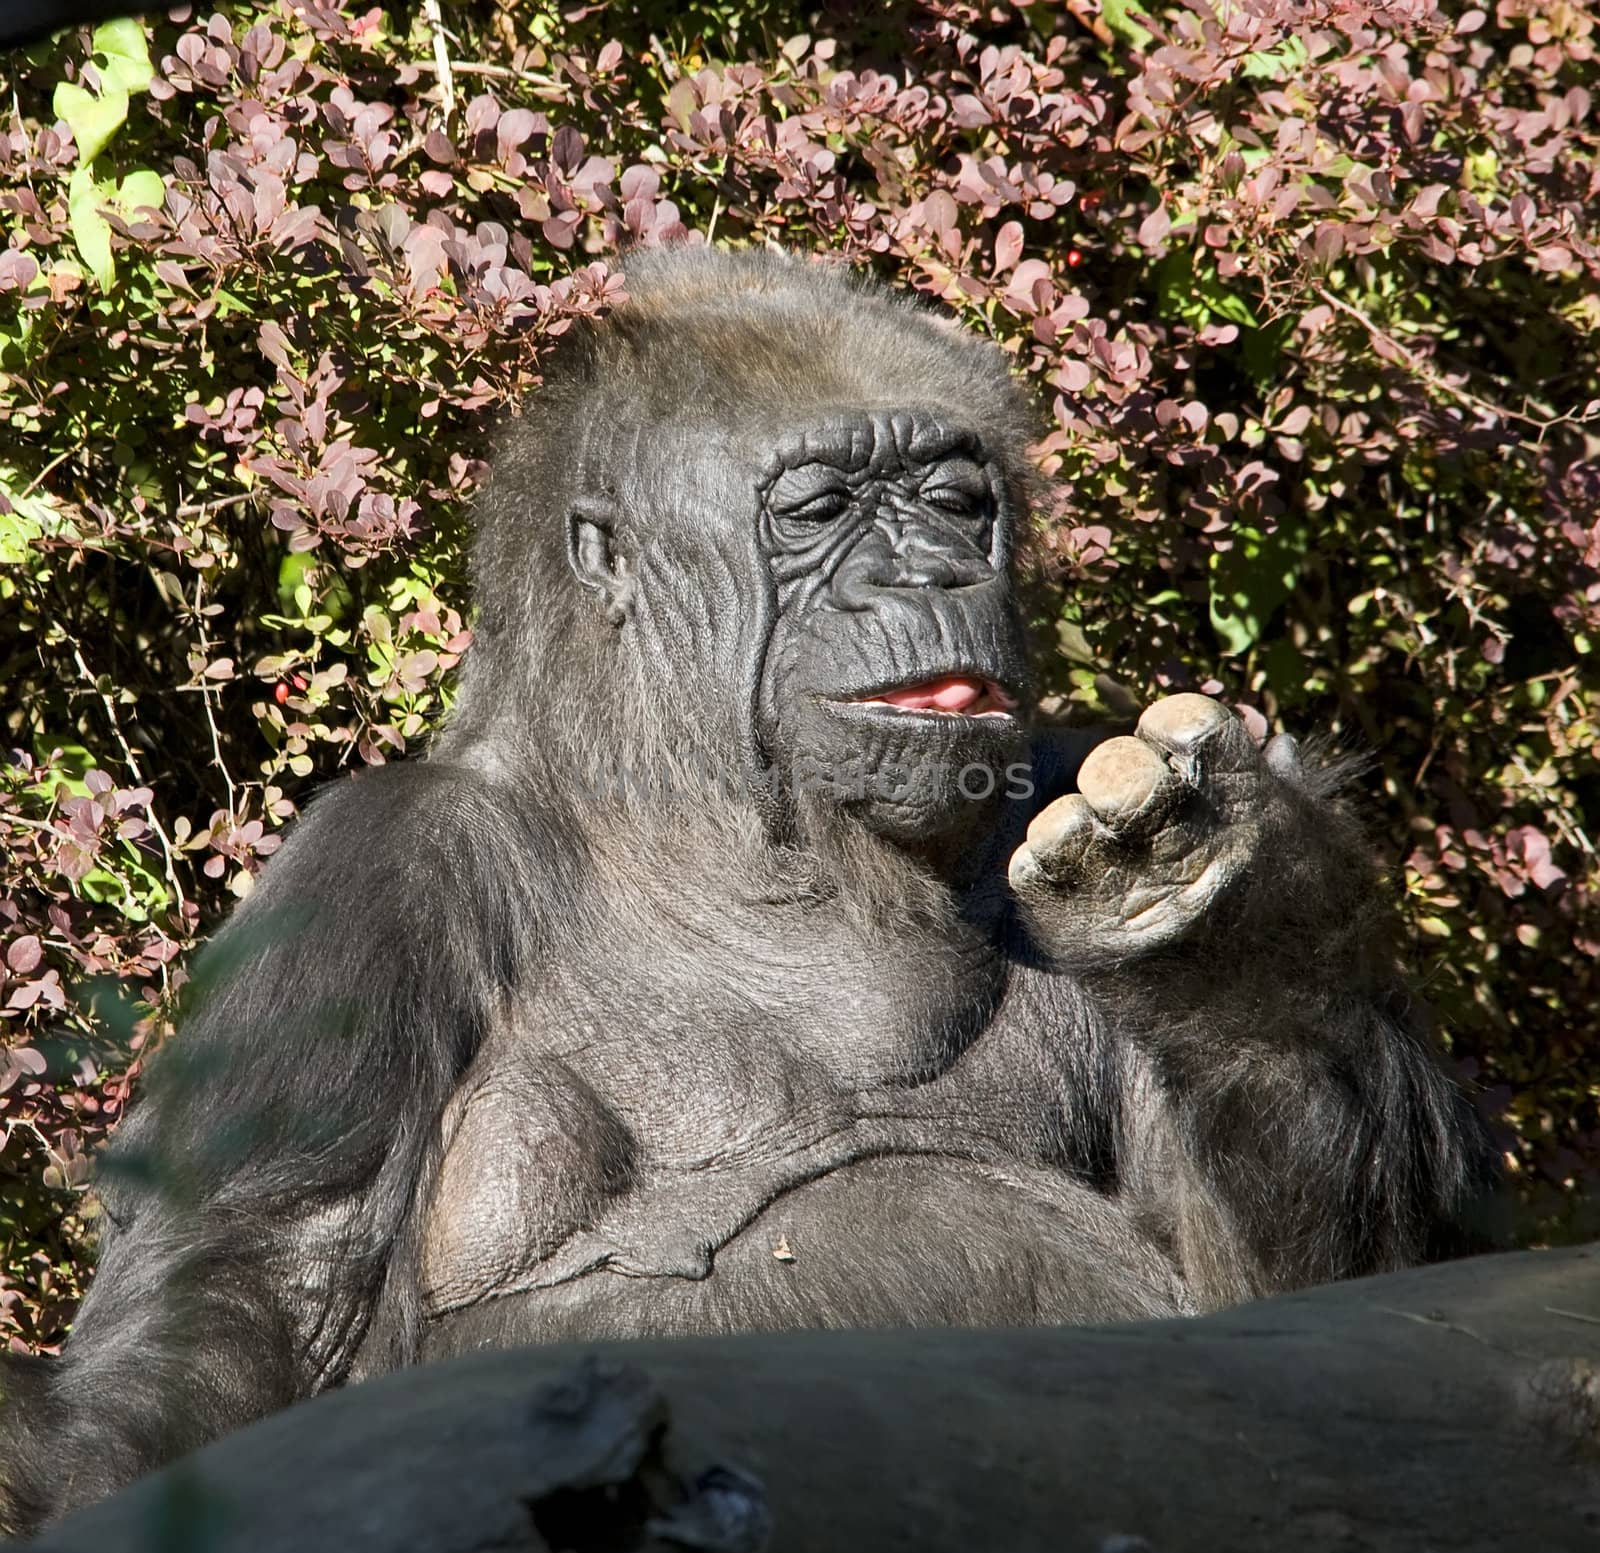 Western Lowland Gorilla Ape Looking at Fingers

Resubmit--In response to comments from reviewer have further processed image to reduce noise, sharpen focus and adjust lighting.